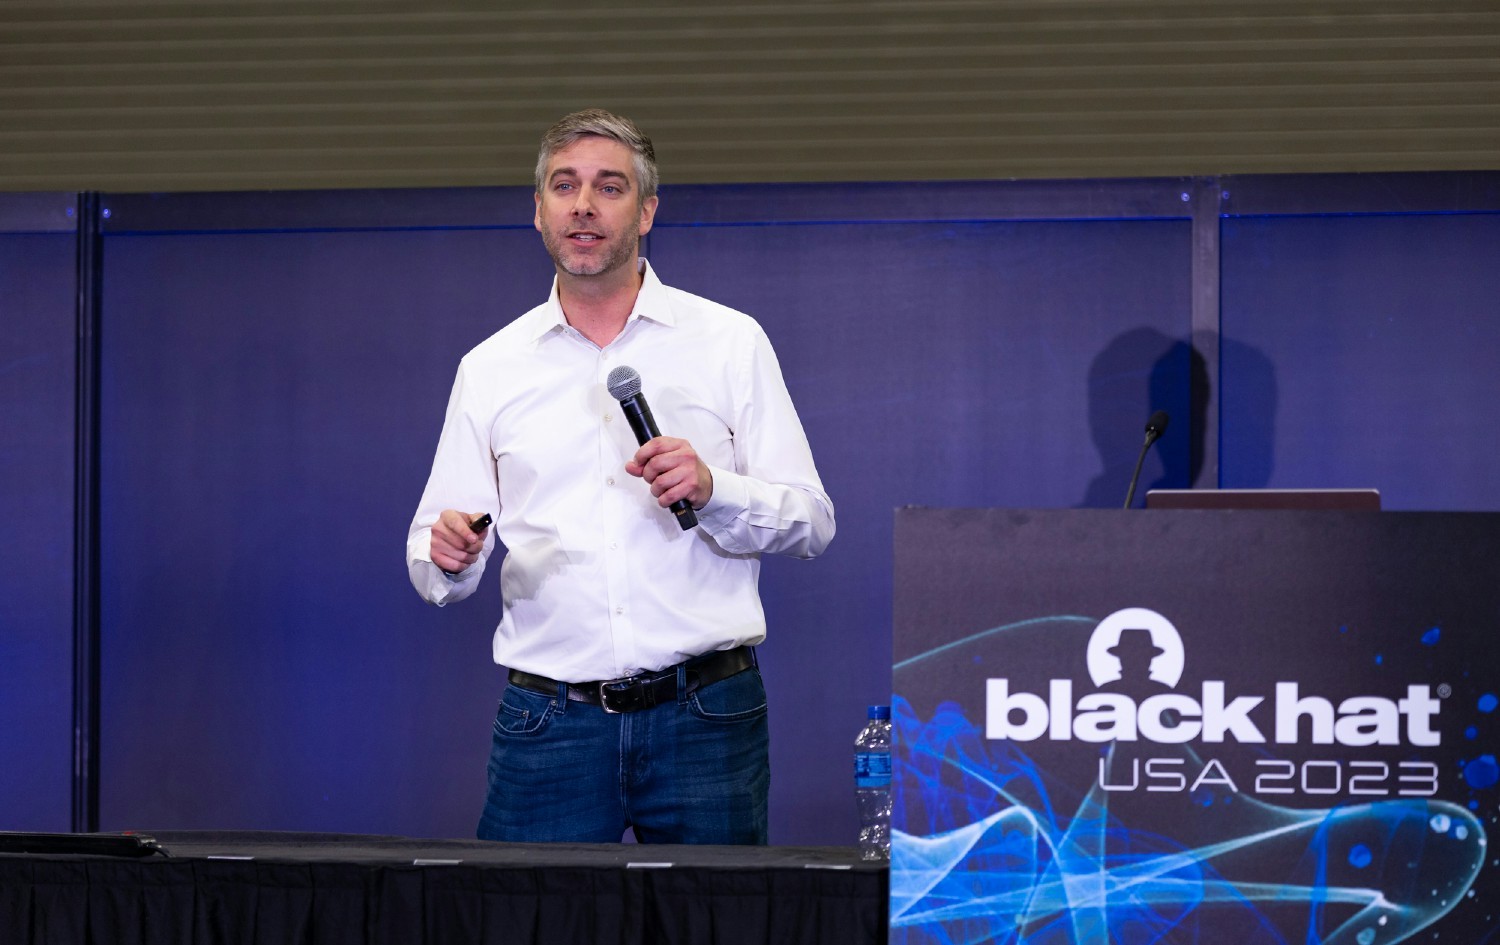 AppOmni CEO Brendan O’Connor on stage at Black Hat USA to discuss identity risk within the SaaS ecosystem. 